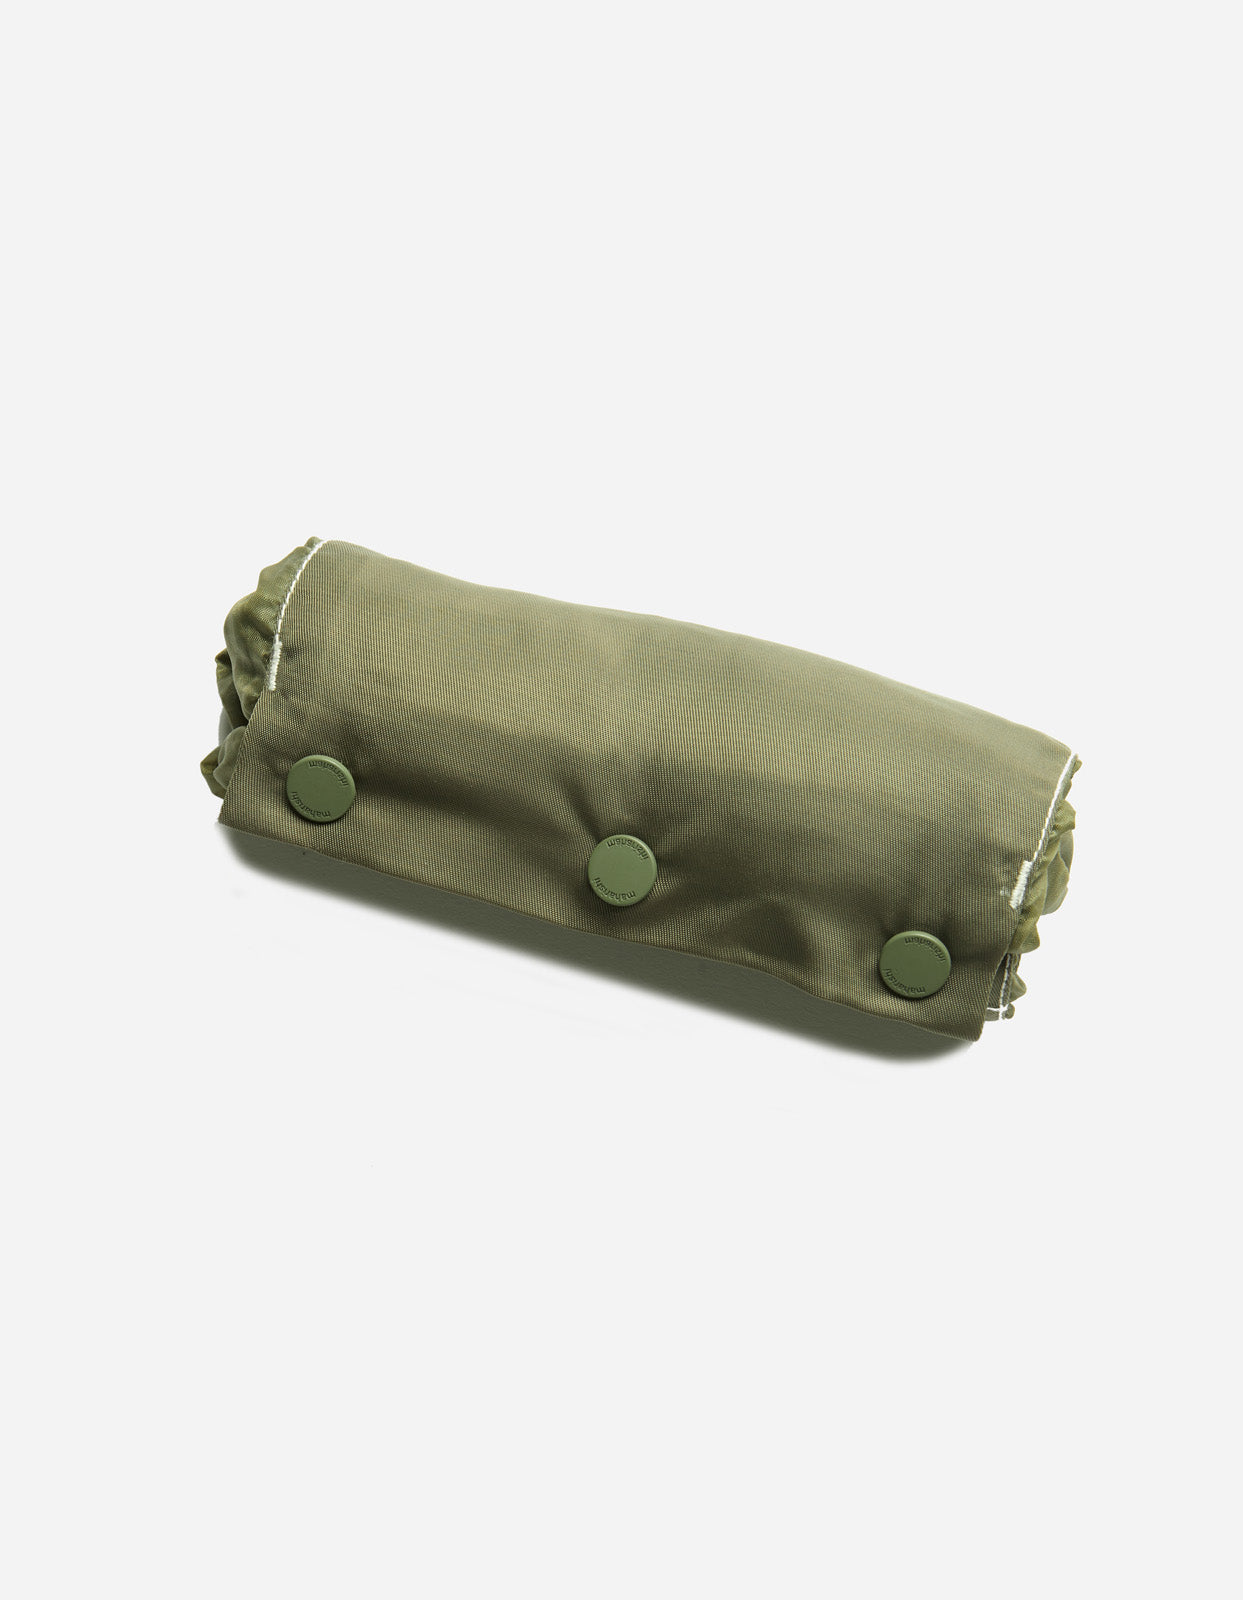 5073 Upcycled Rollaway Shopping Bag Olive